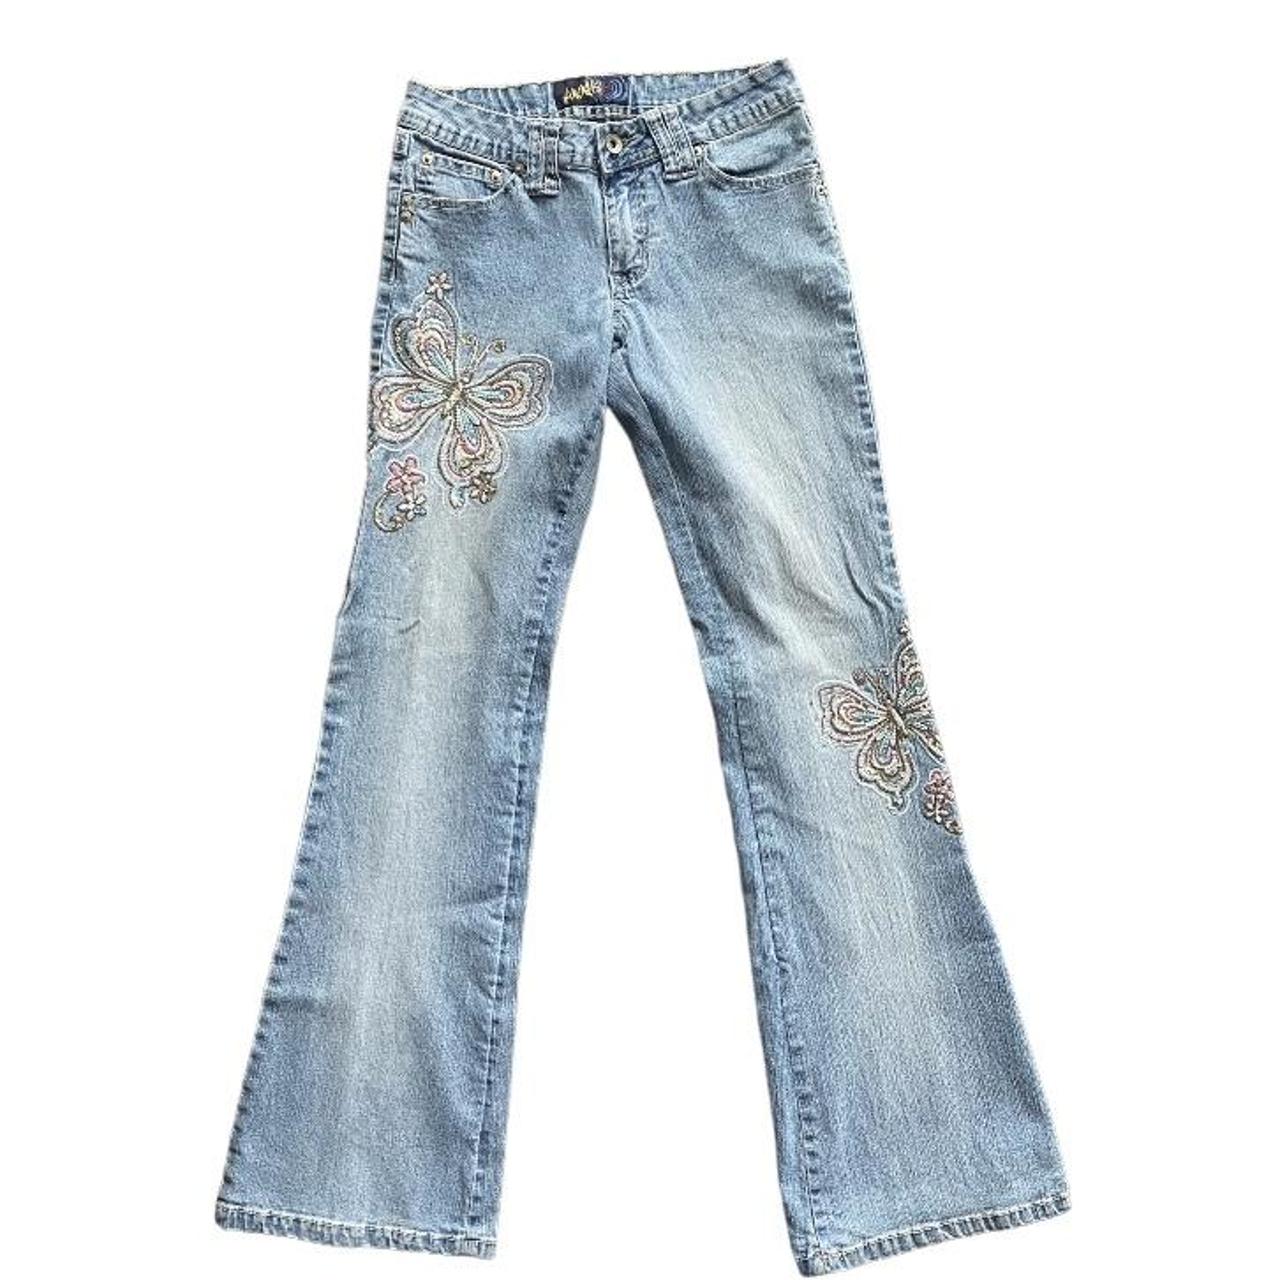 Y2k Butterfly bedazzled flare jeans🦋 omgg i love... - Depop